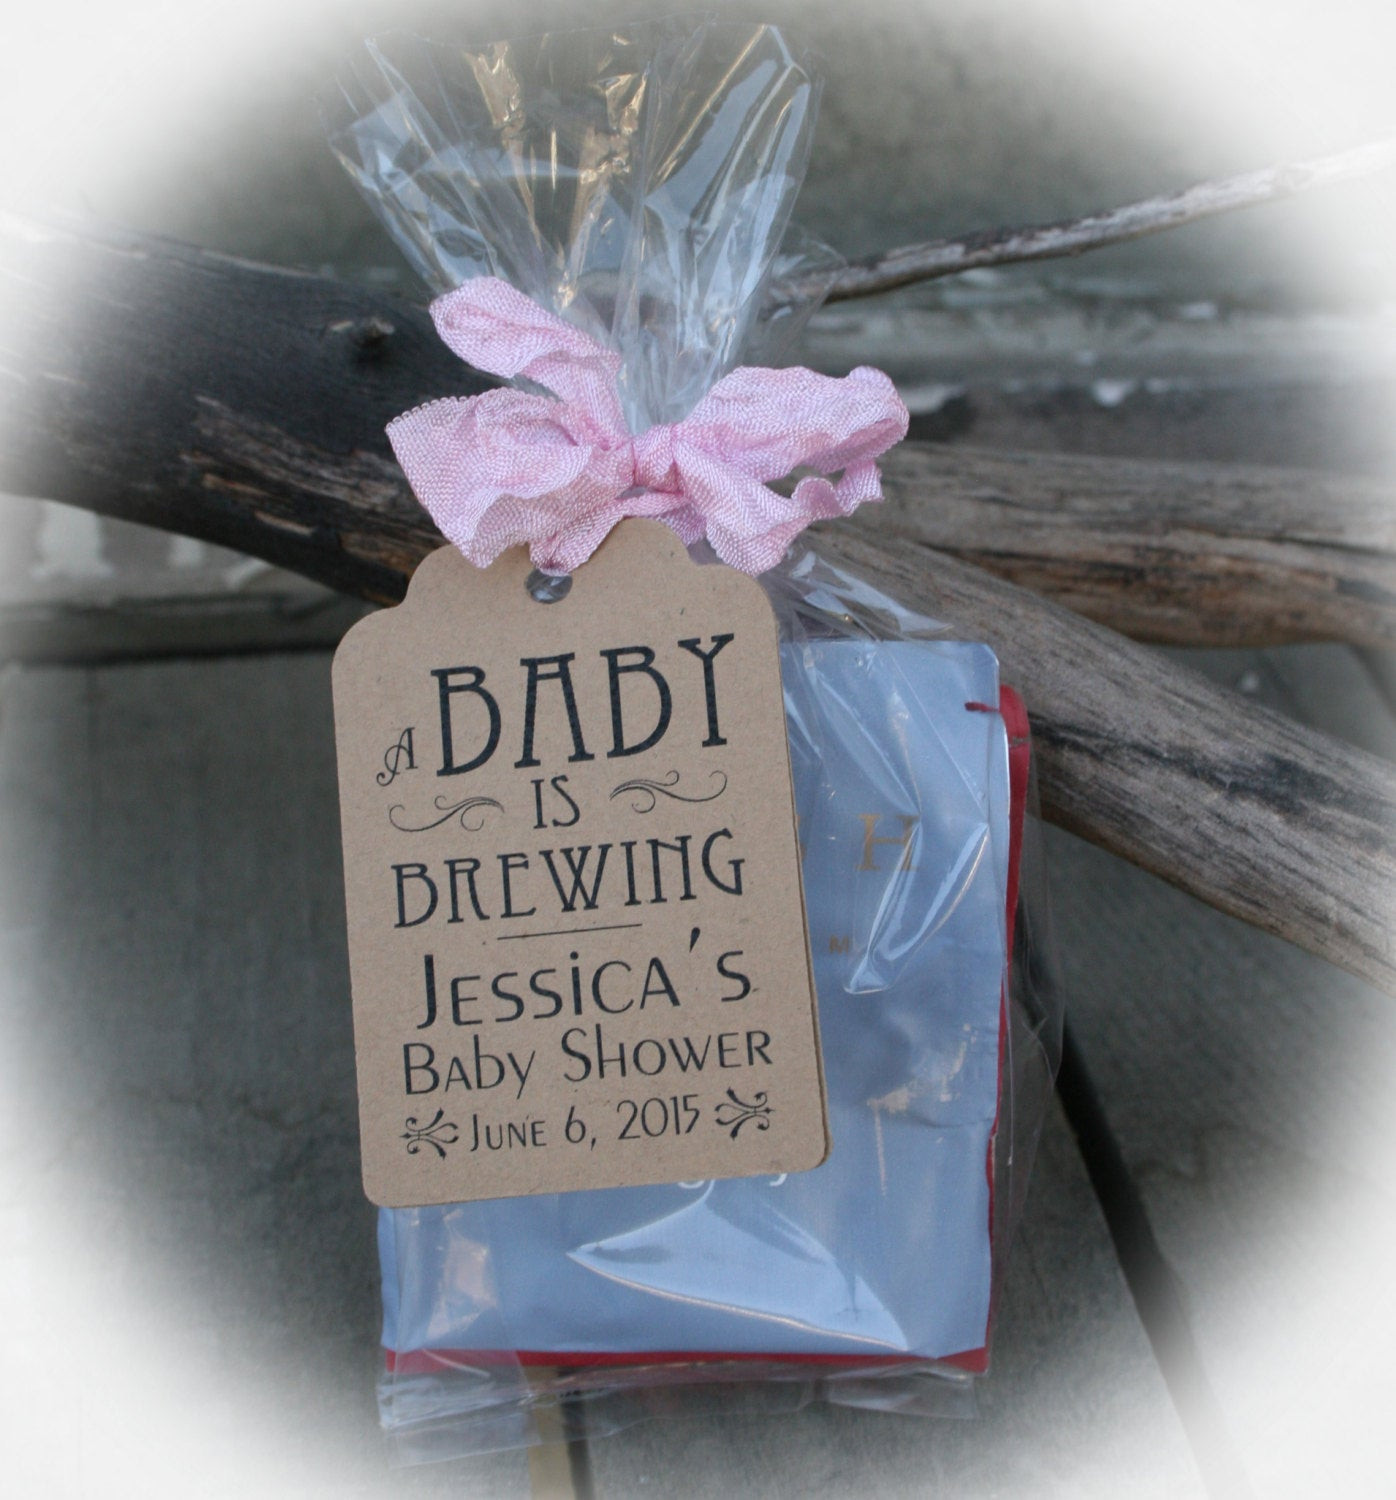 Cheap DIY Baby Shower Favors
 A BABY is Brewing Baby Shower Favors DIY Bags Favor Tags